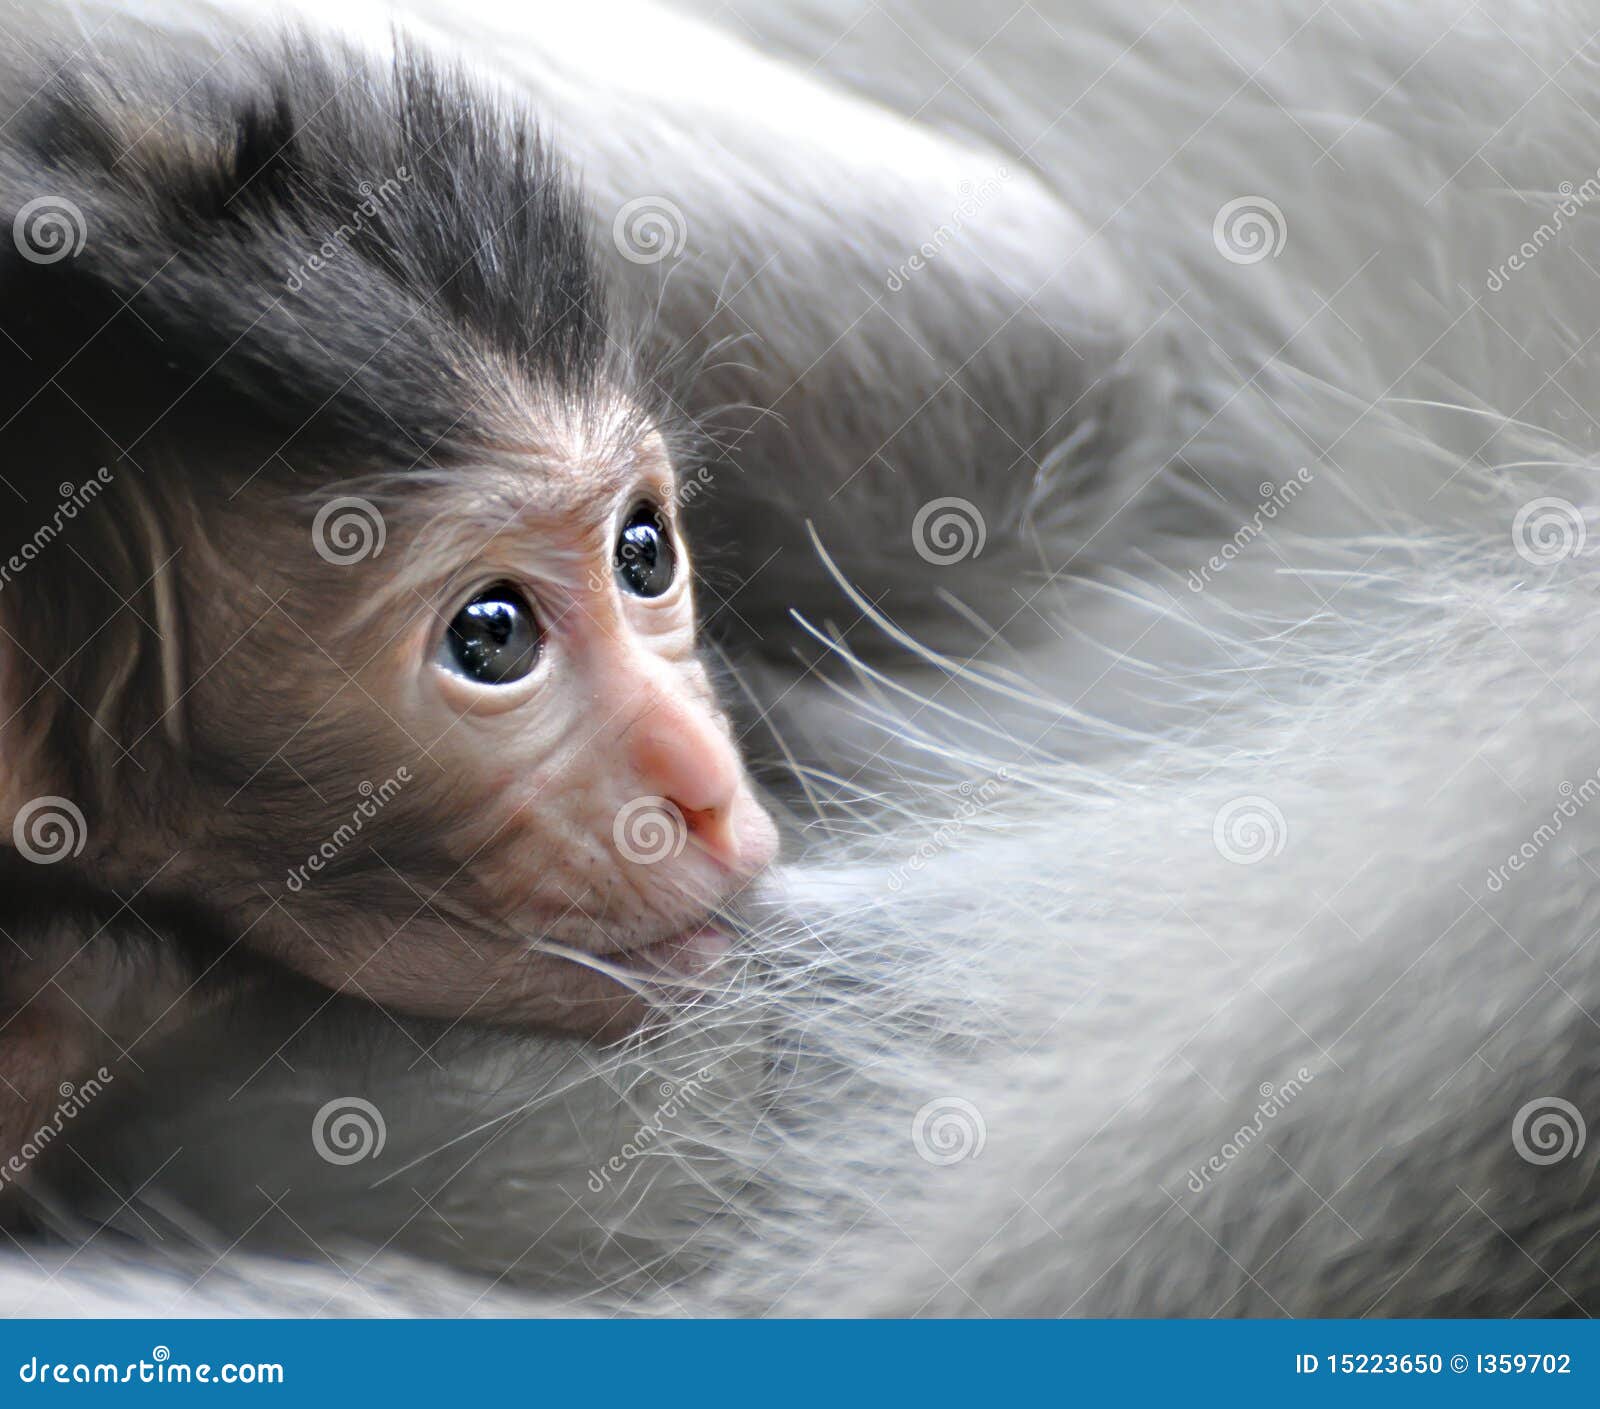 barbary macaque monkey baby